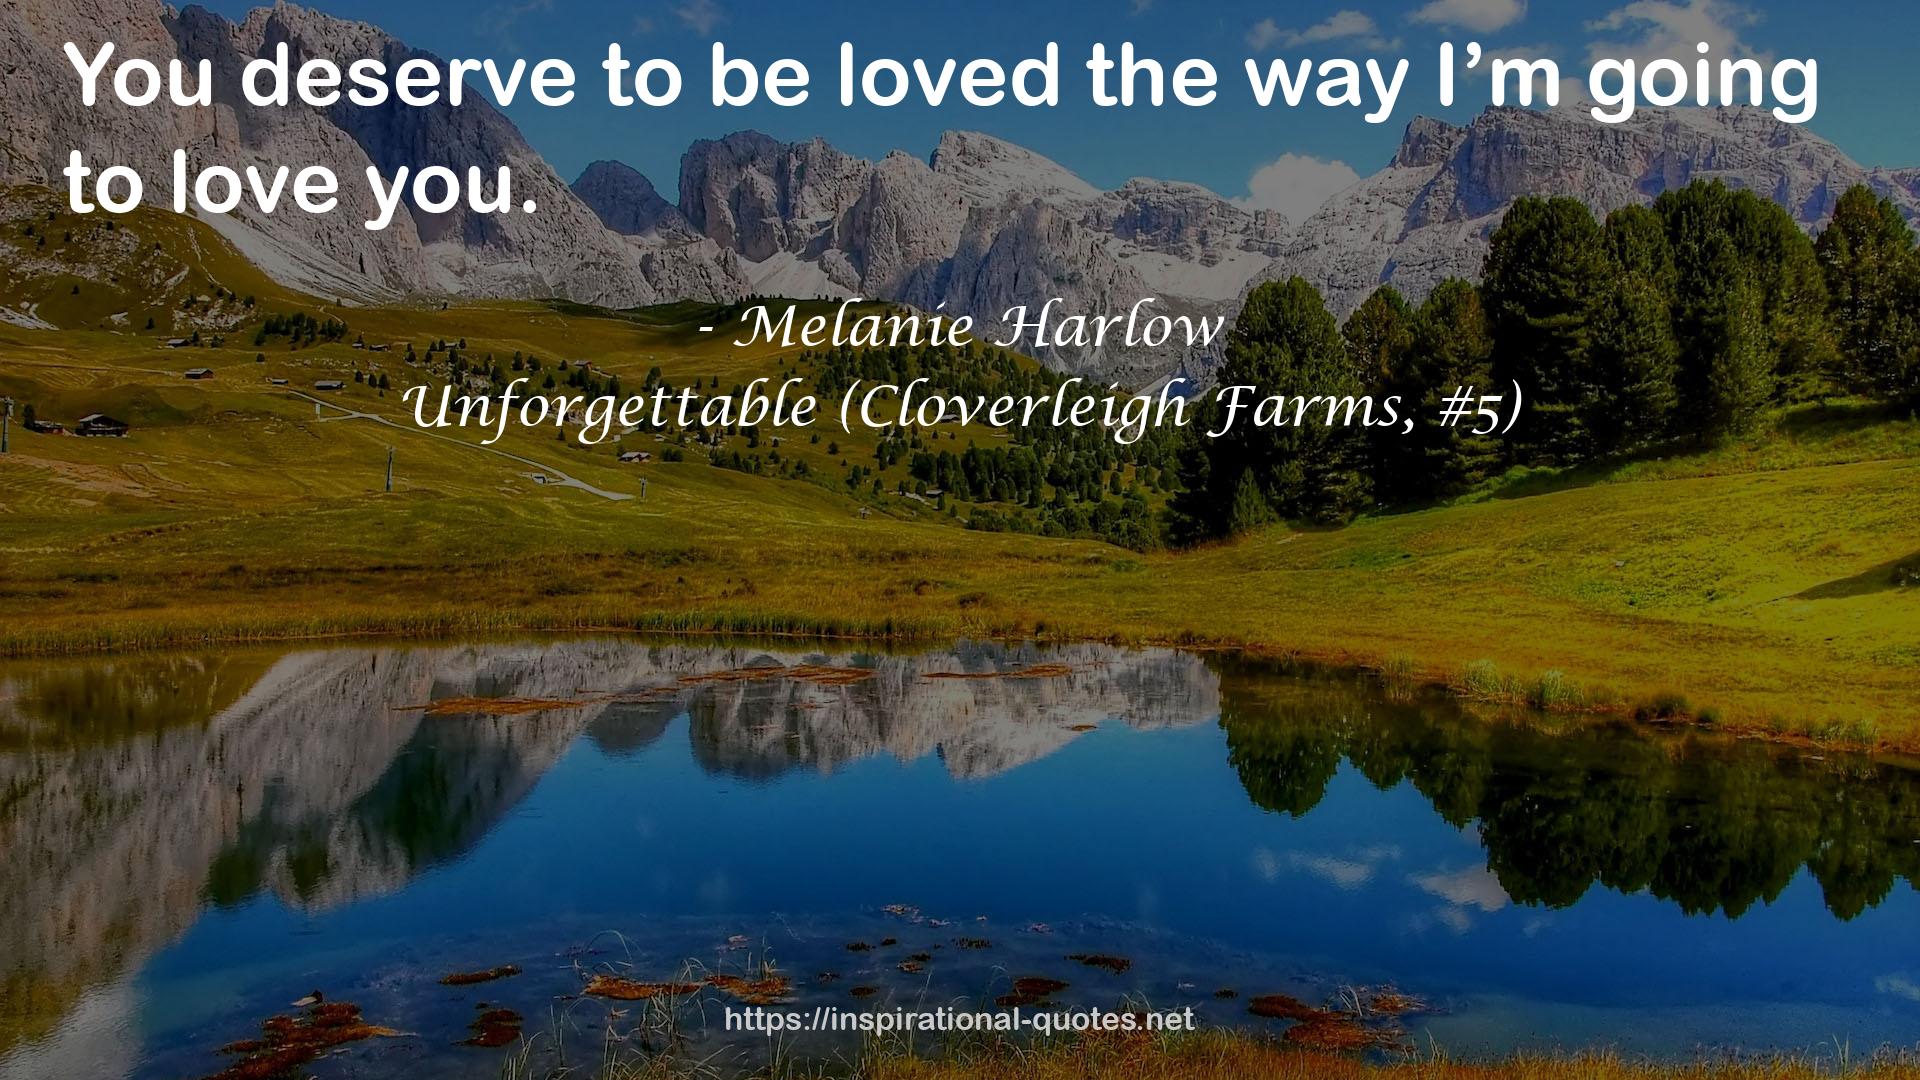 Unforgettable (Cloverleigh Farms, #5) QUOTES